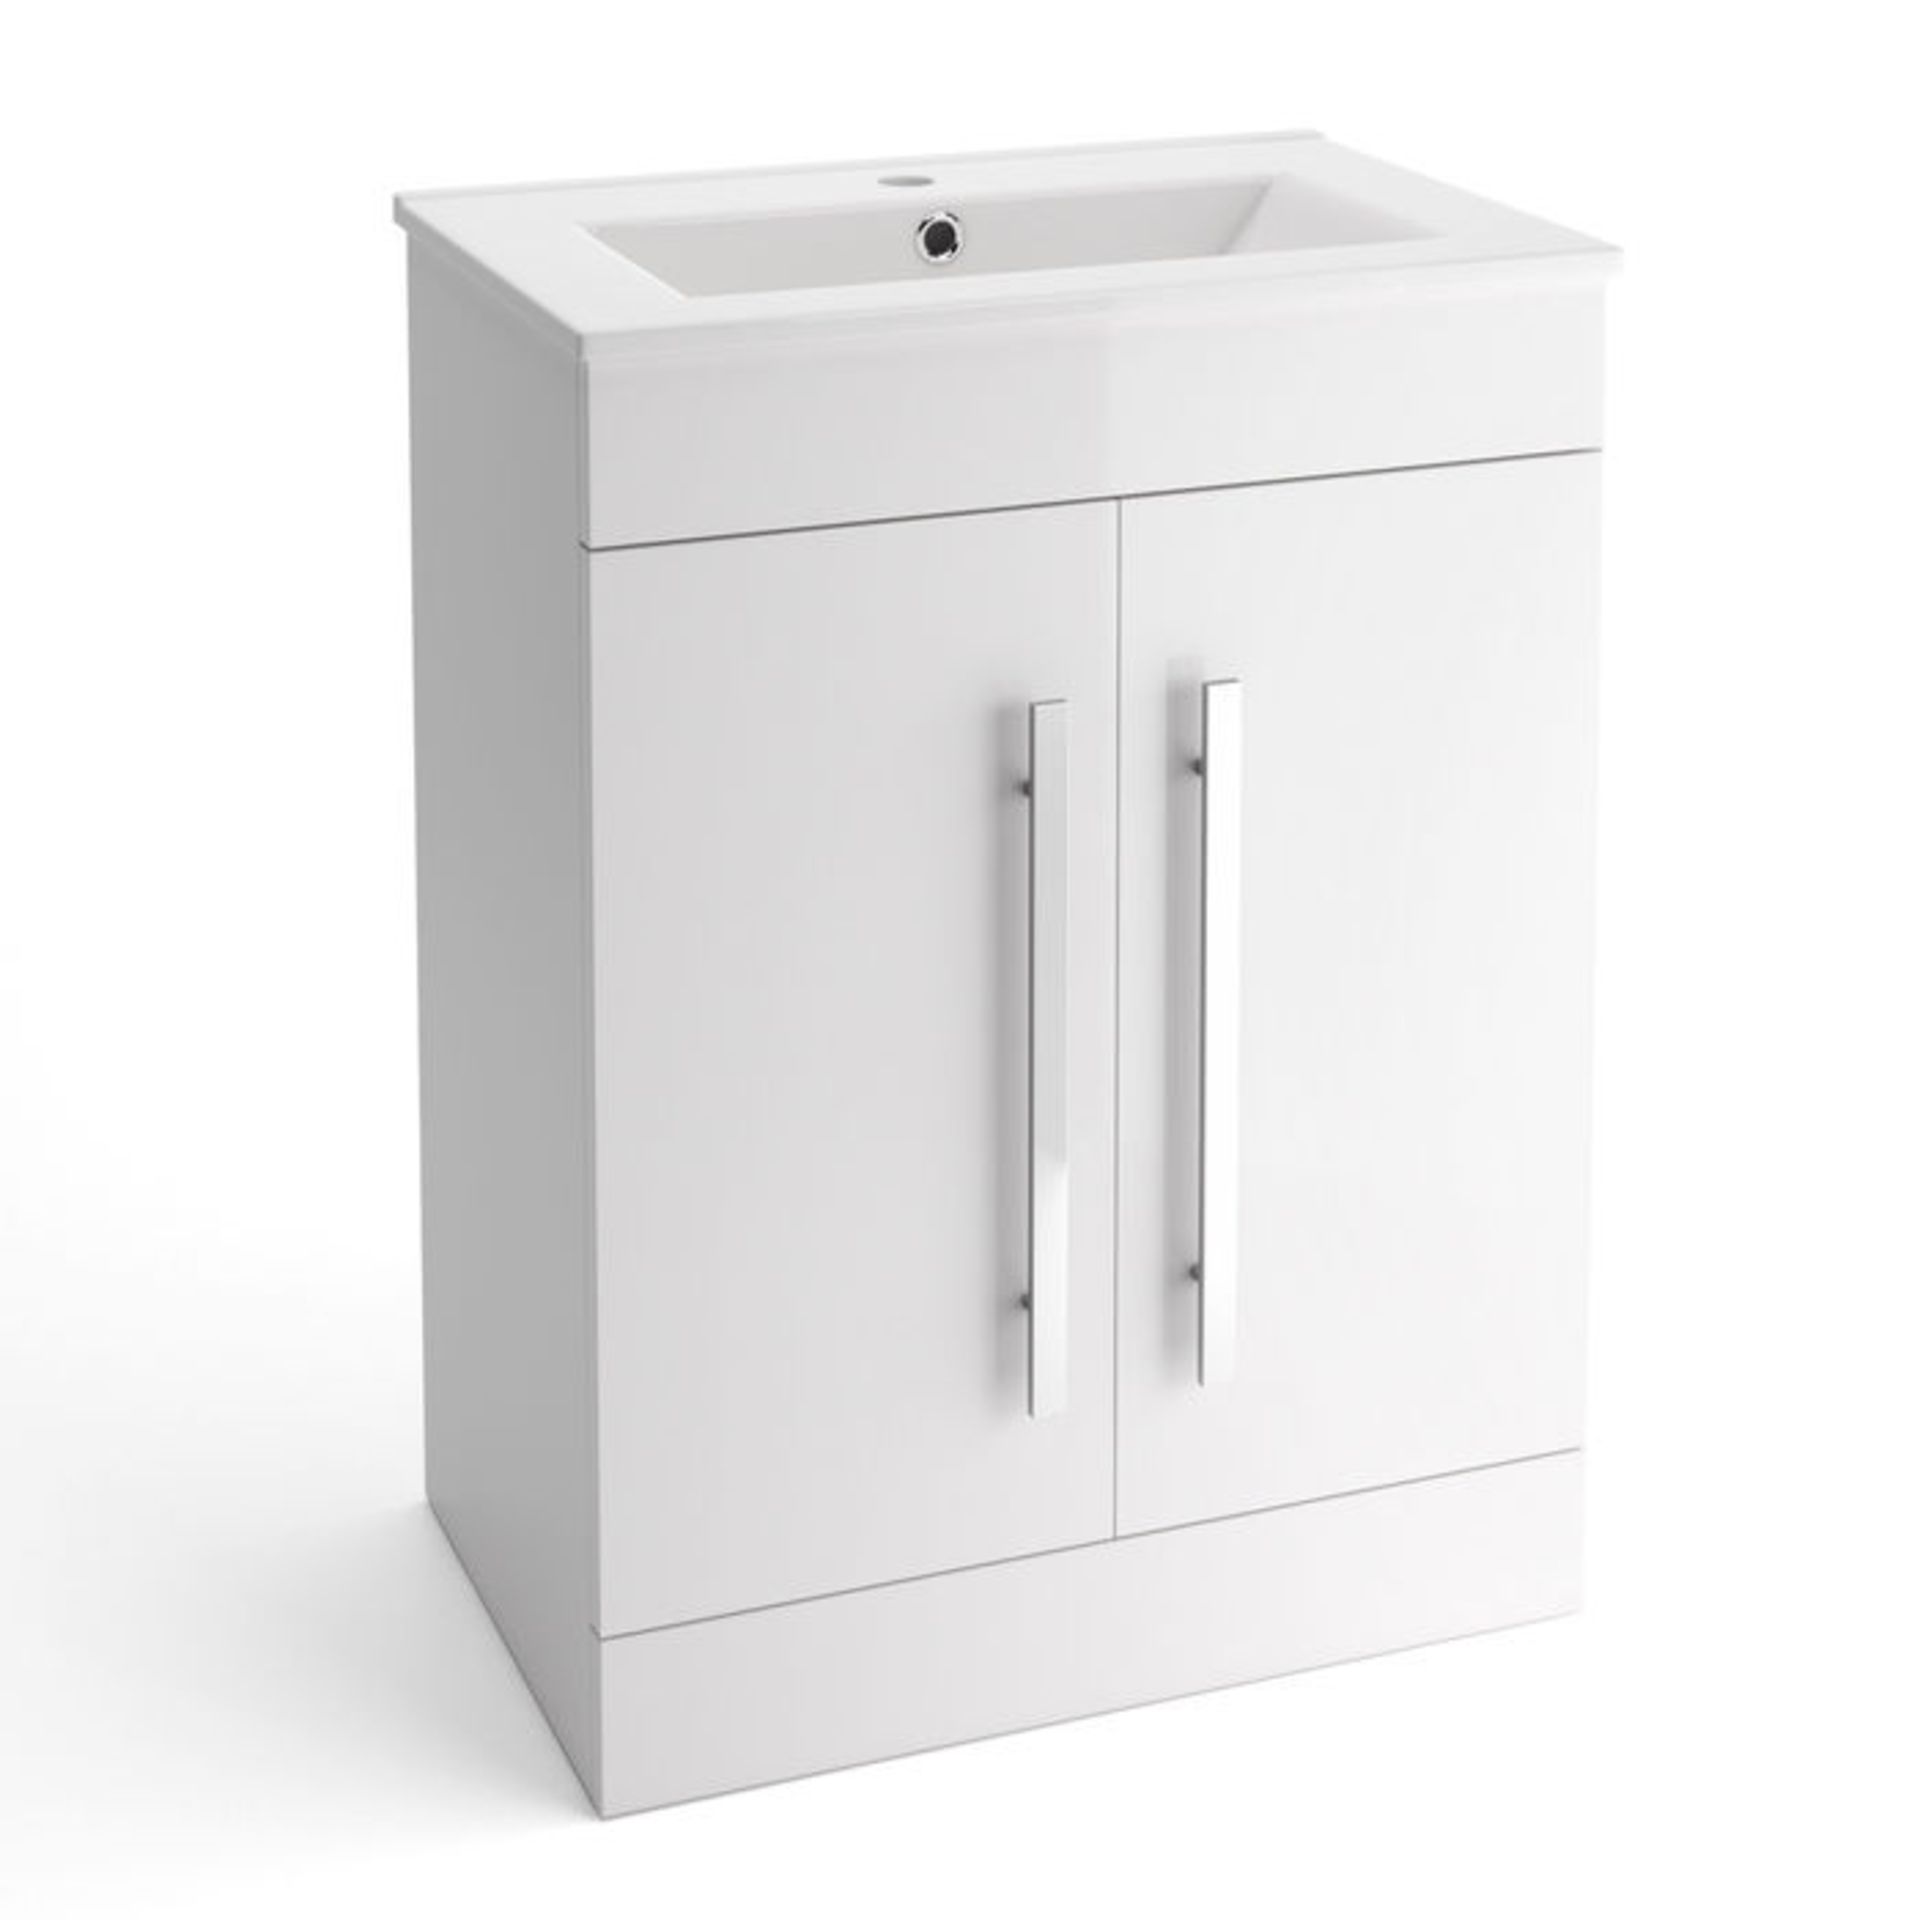 (JM29) 600mm Avon High Gloss White Basin Cabinet - Floor Standing. RRP £499.99. Comes complete - Image 5 of 5